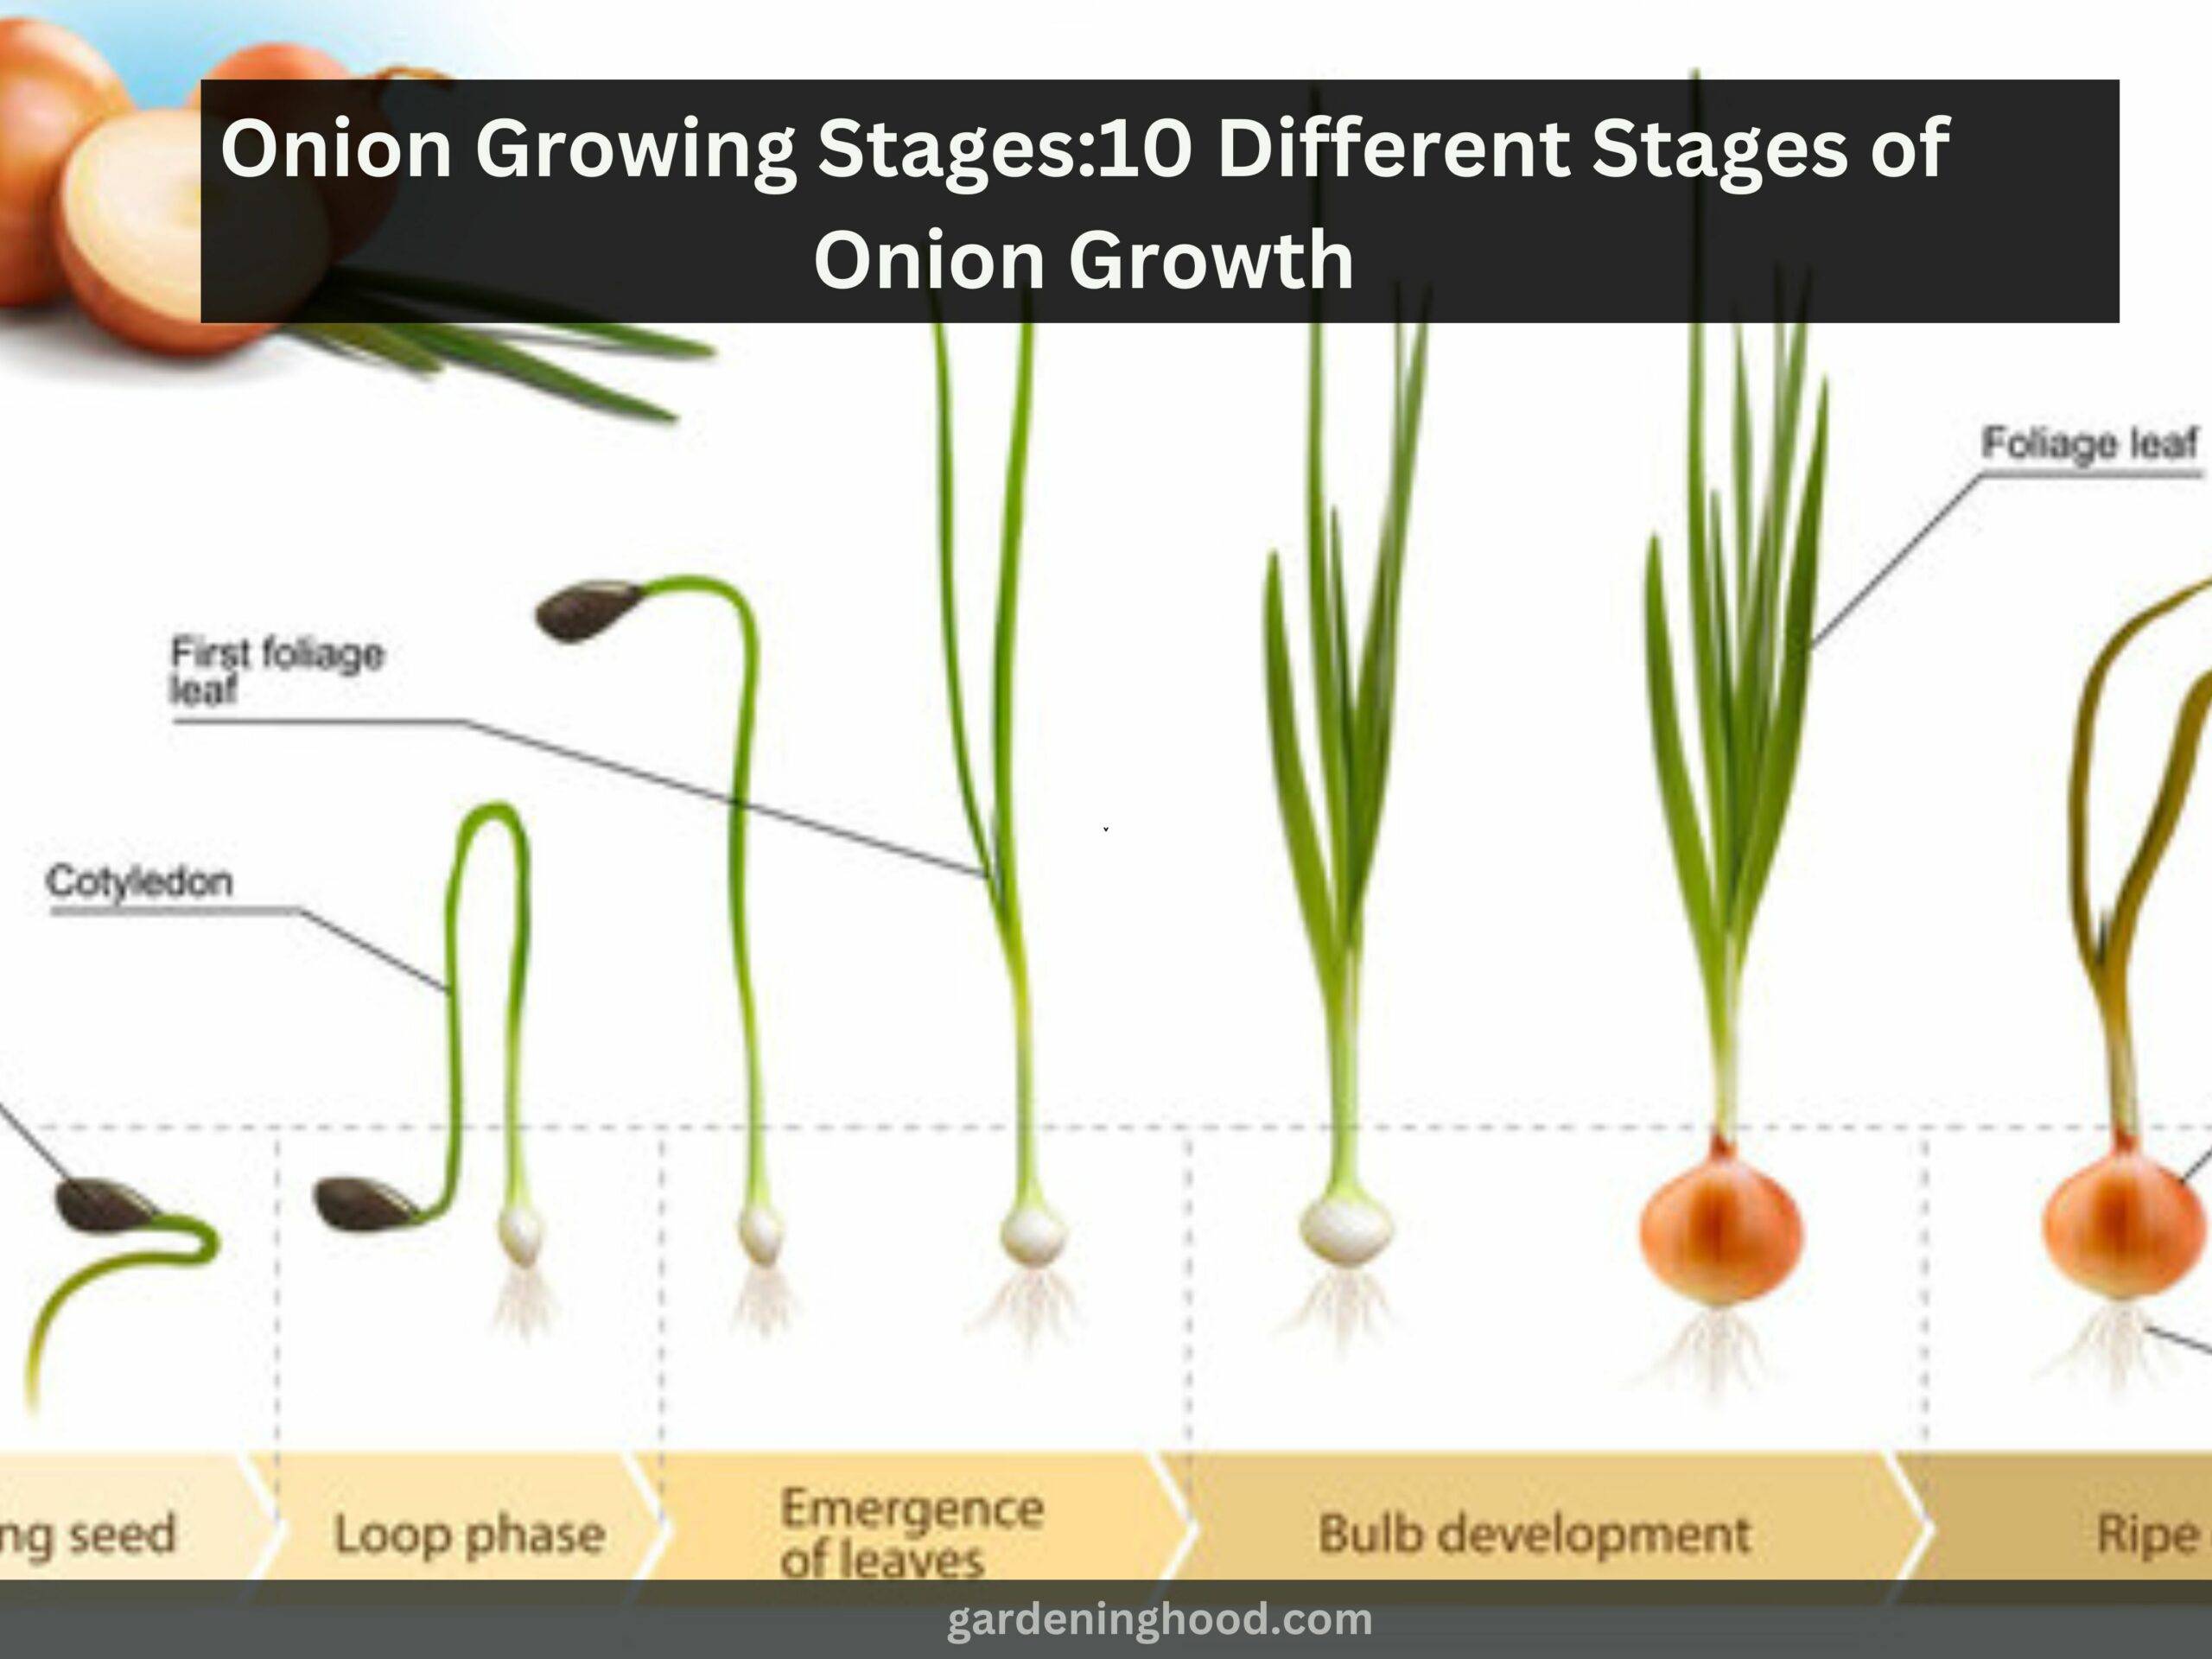 Onion Growing Stages:10 Different Stages of Onion Growth